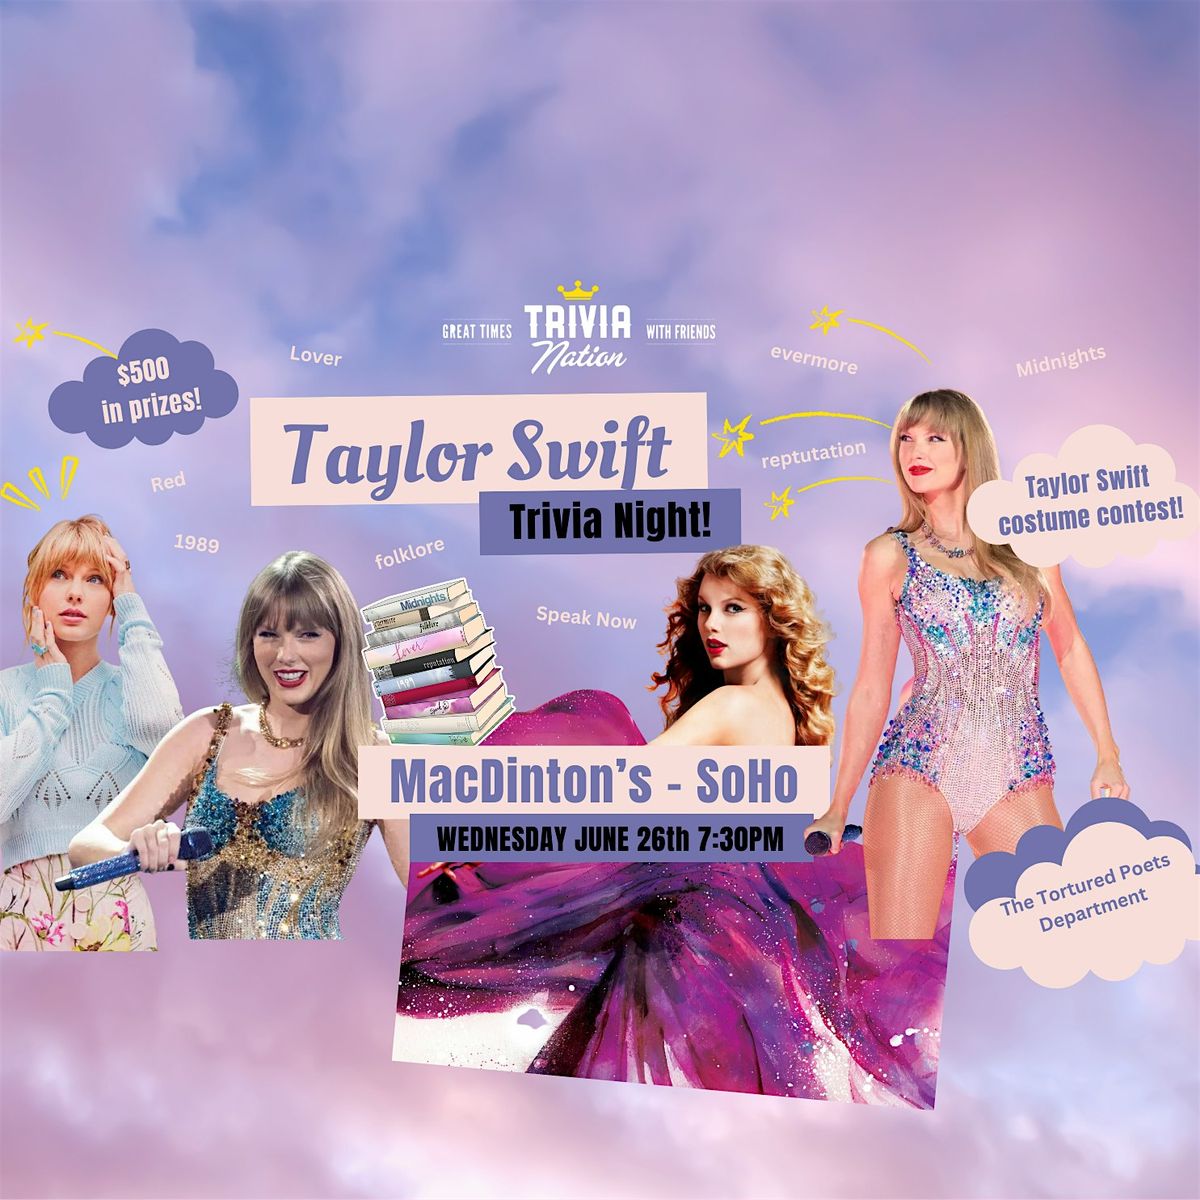 Taylor Swift Trivia Night at MacDinton's SoHo $500 in Prizes!!